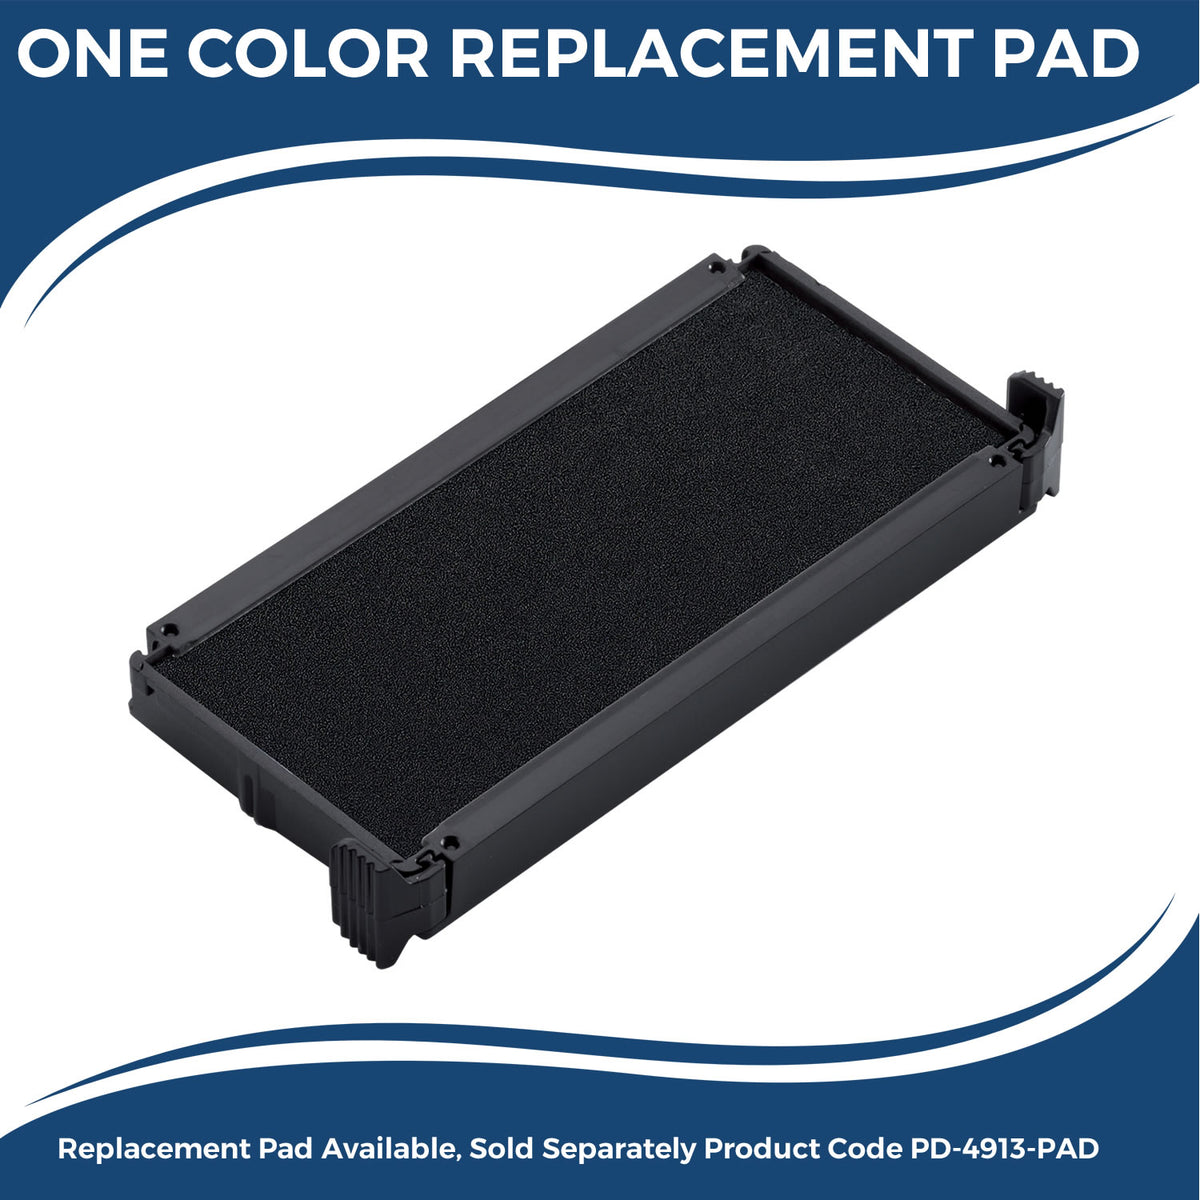 Large Self-Inking Do Not Bend Stamp 4895S Large Replacment Pad